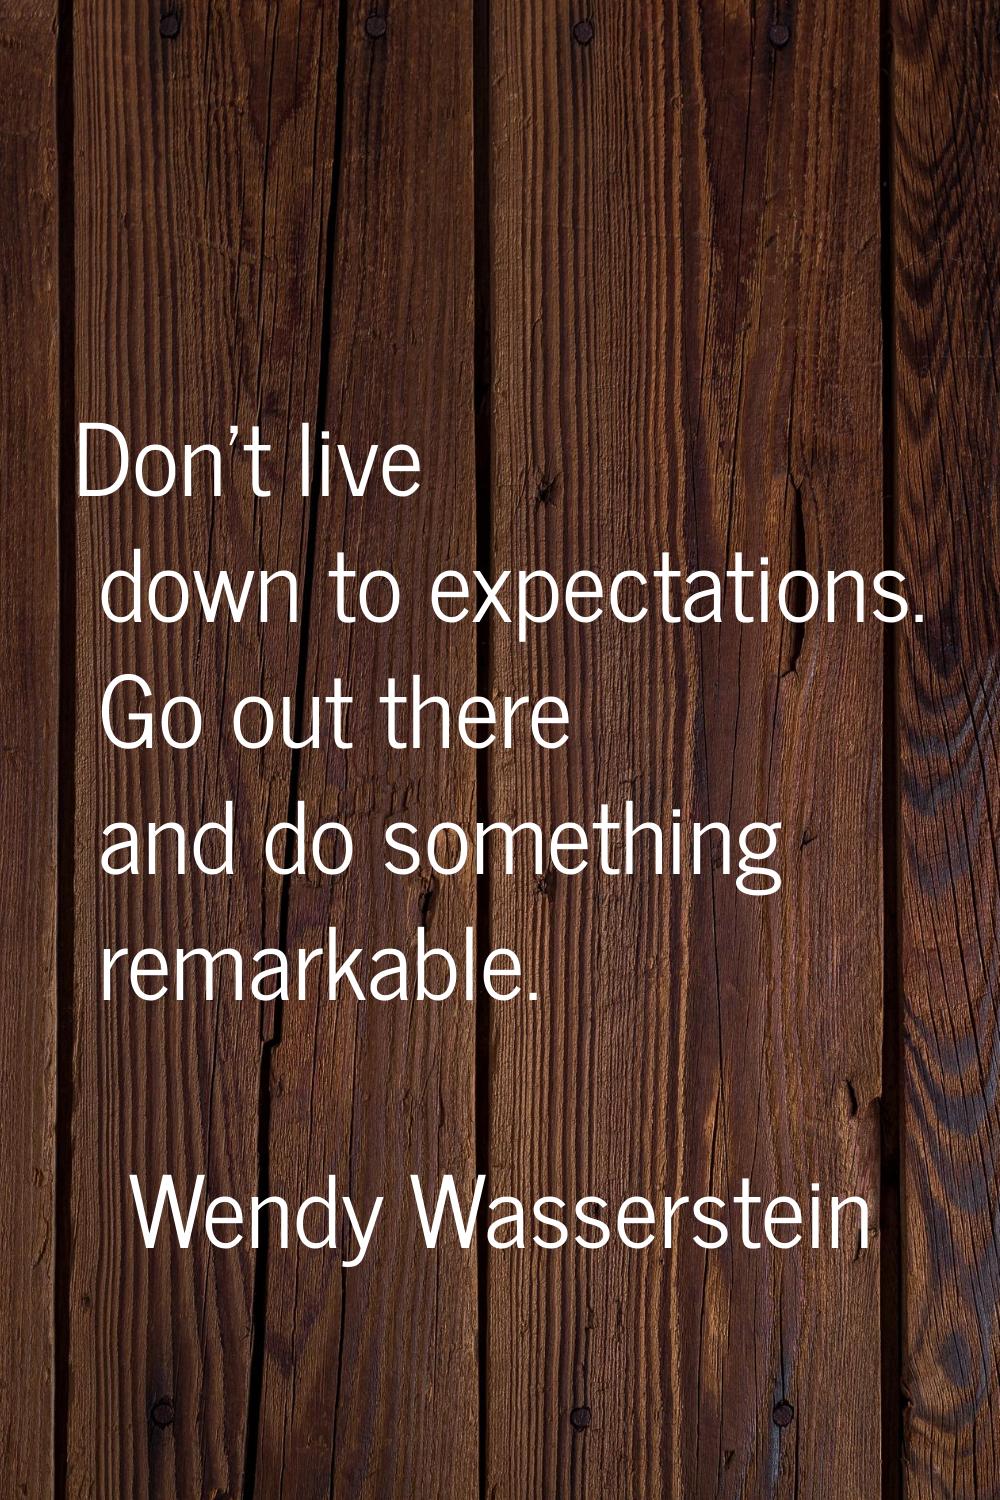 Don't live down to expectations. Go out there and do something remarkable.